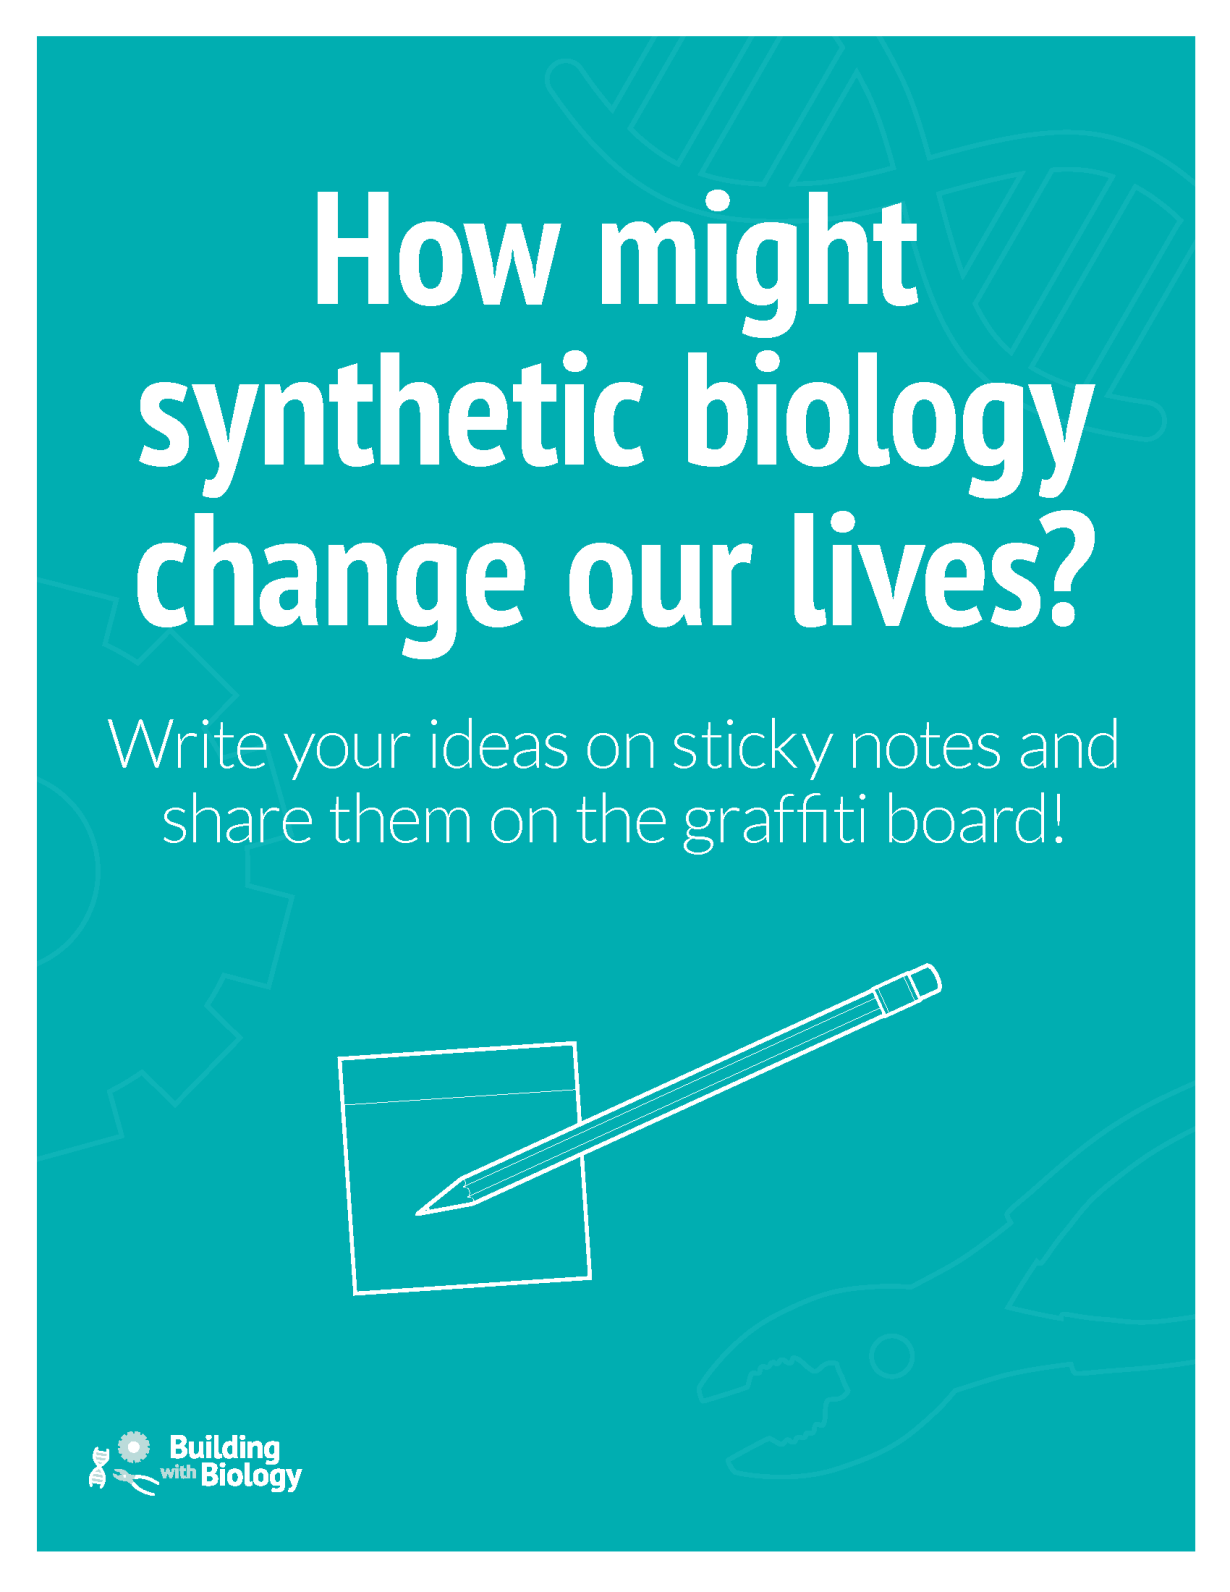 Screen shot of a blue poster image with text saying "How might synthetic biology change our lives?"